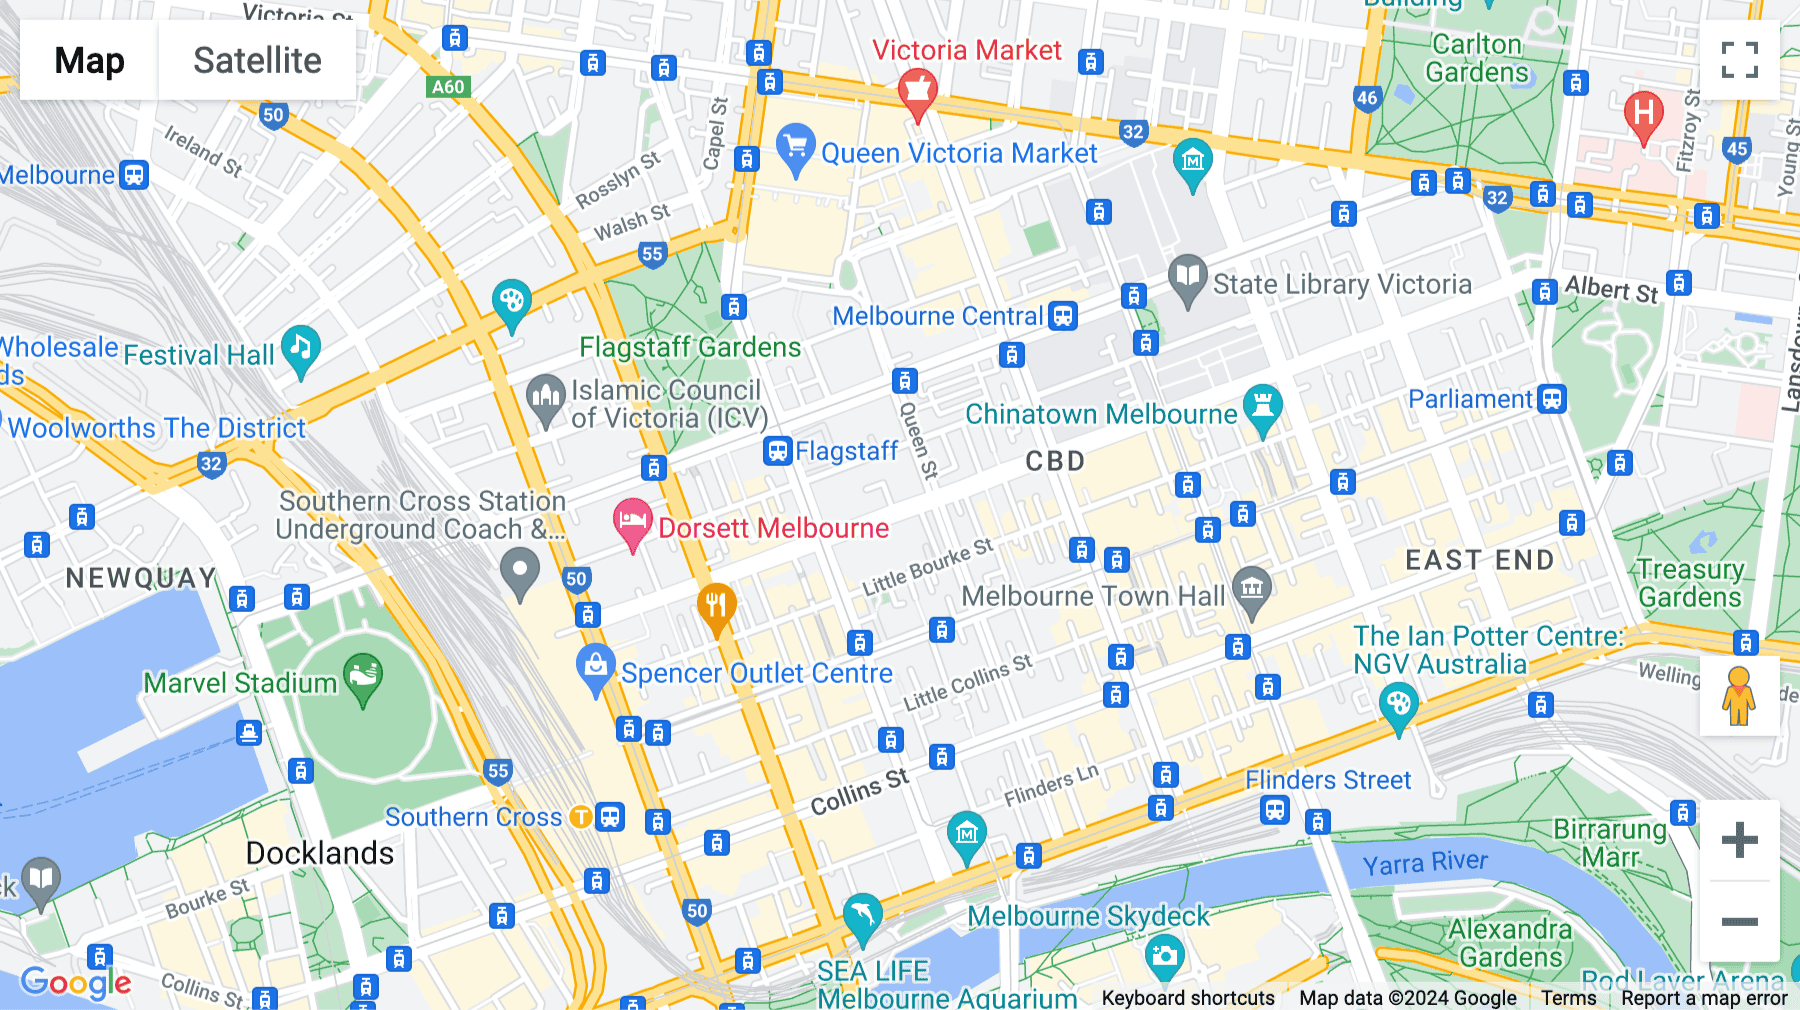 Click for interative map of 456 Lonsdale Street, Melbourne